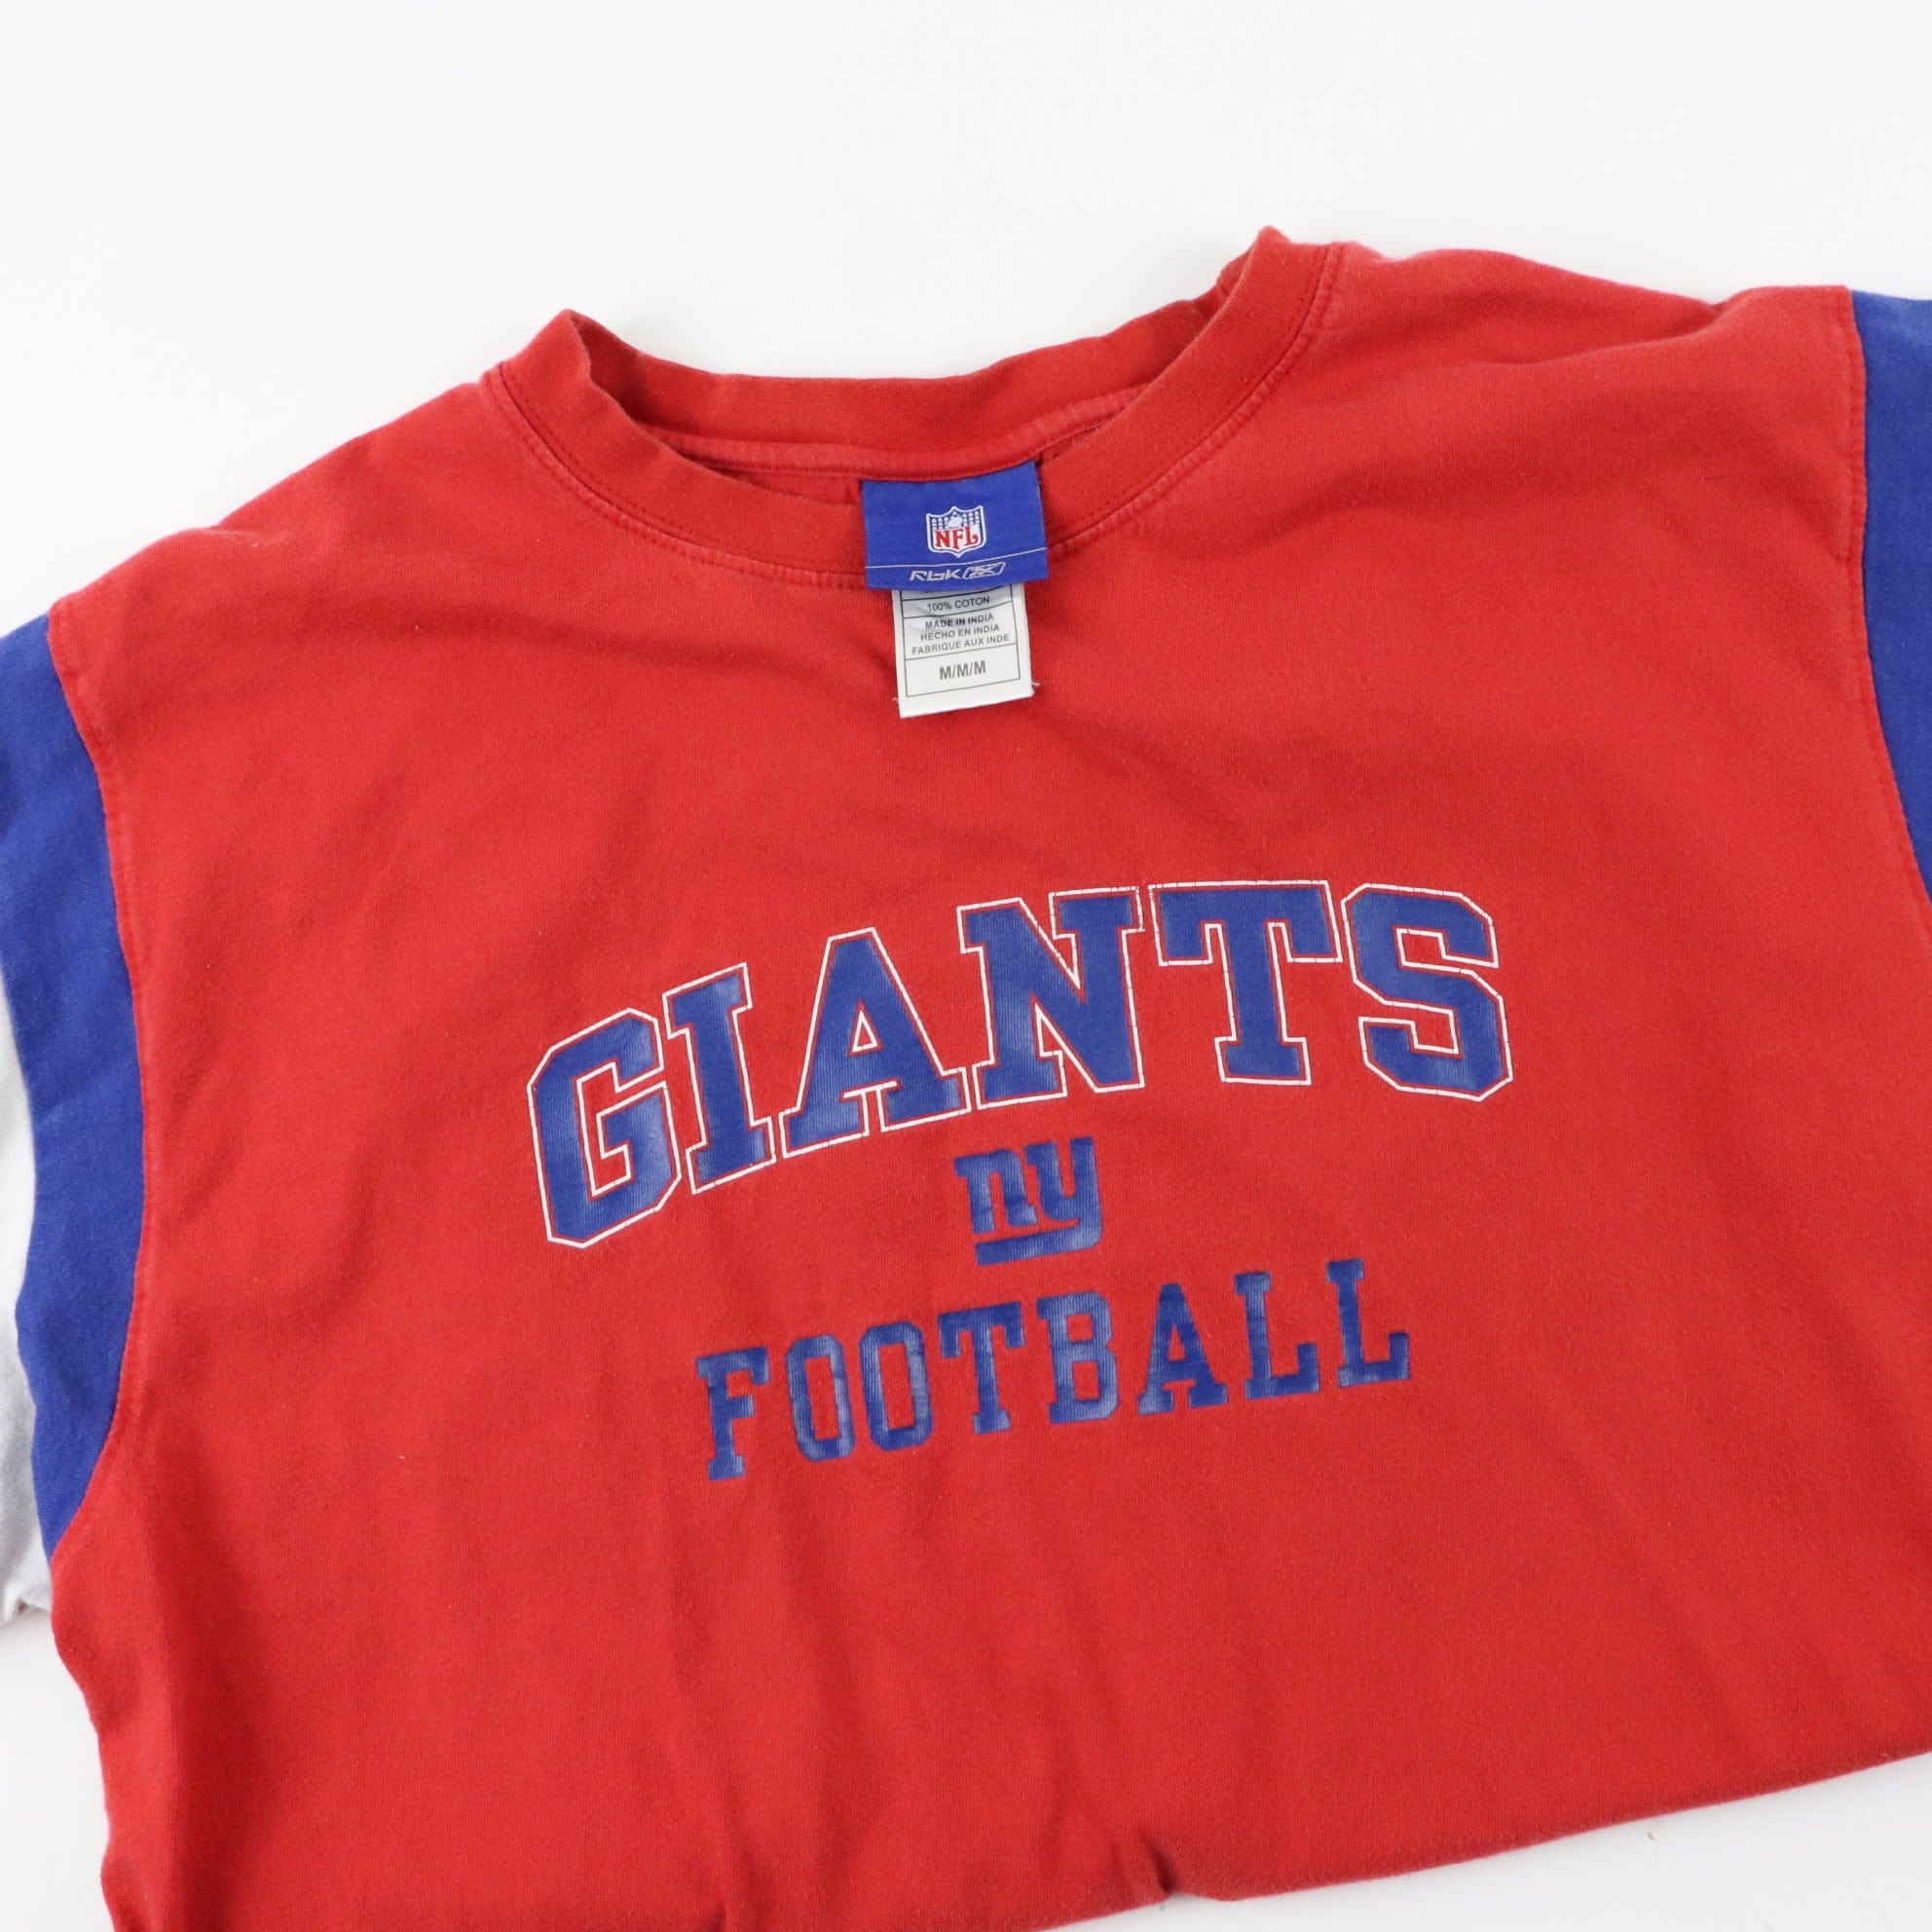 Majestic, Vintage NY Giants Graphic T-shirt